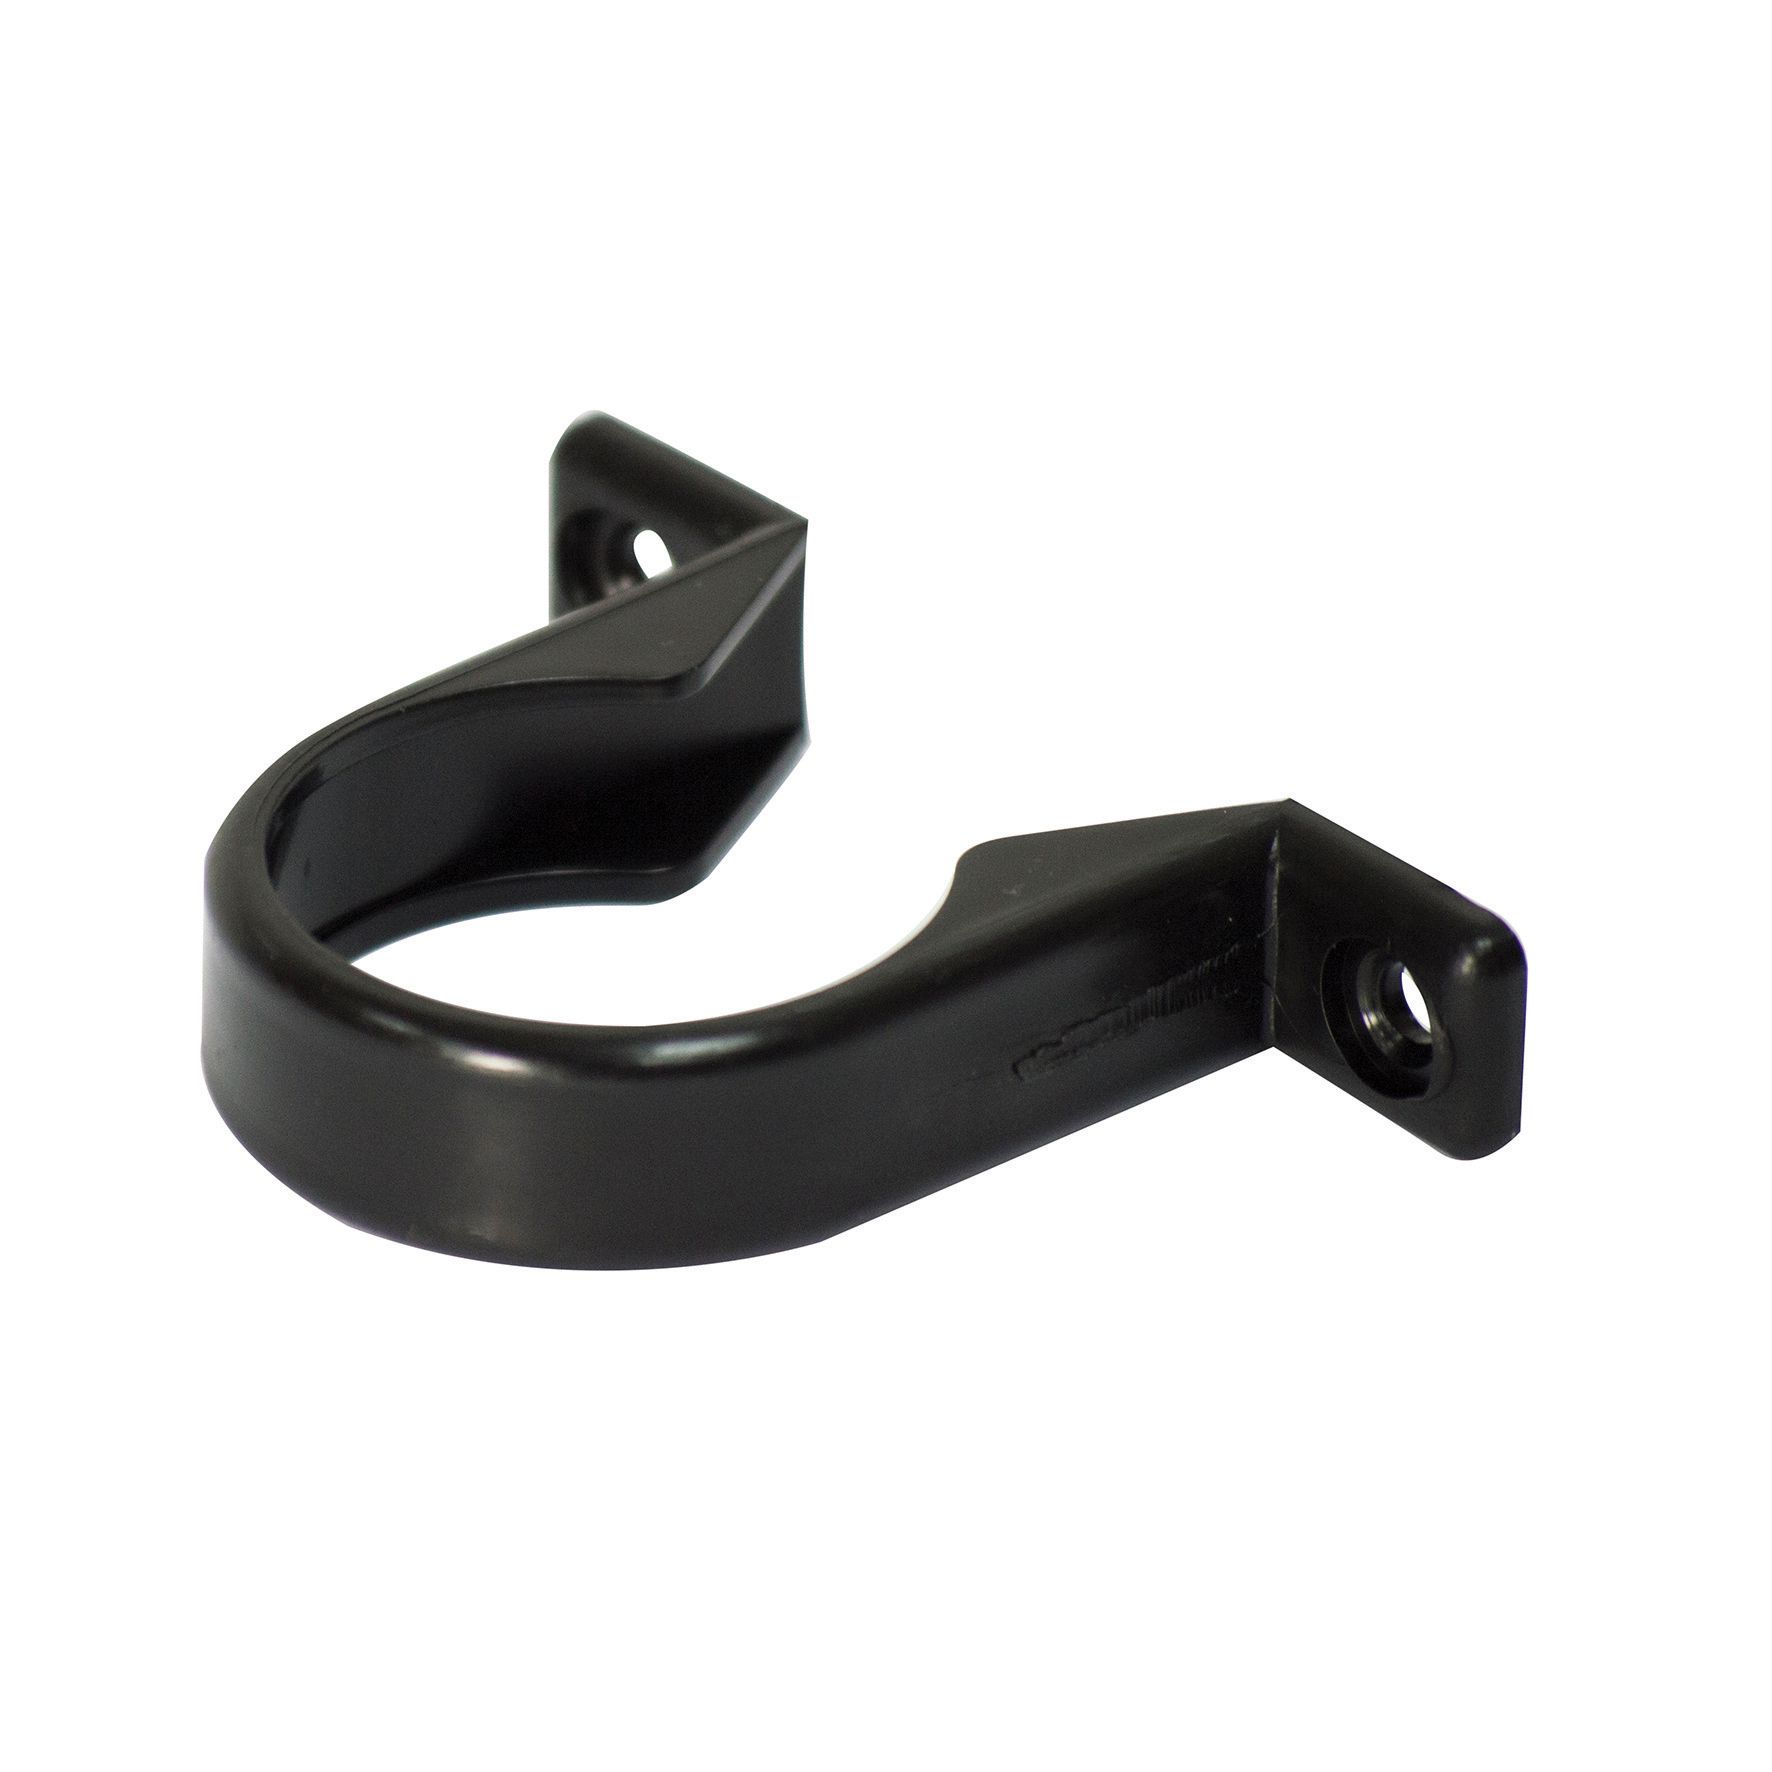 Image of FloPlast WP34B Push-fit Waste Pipe Clips - Black 32mm Pack of 3